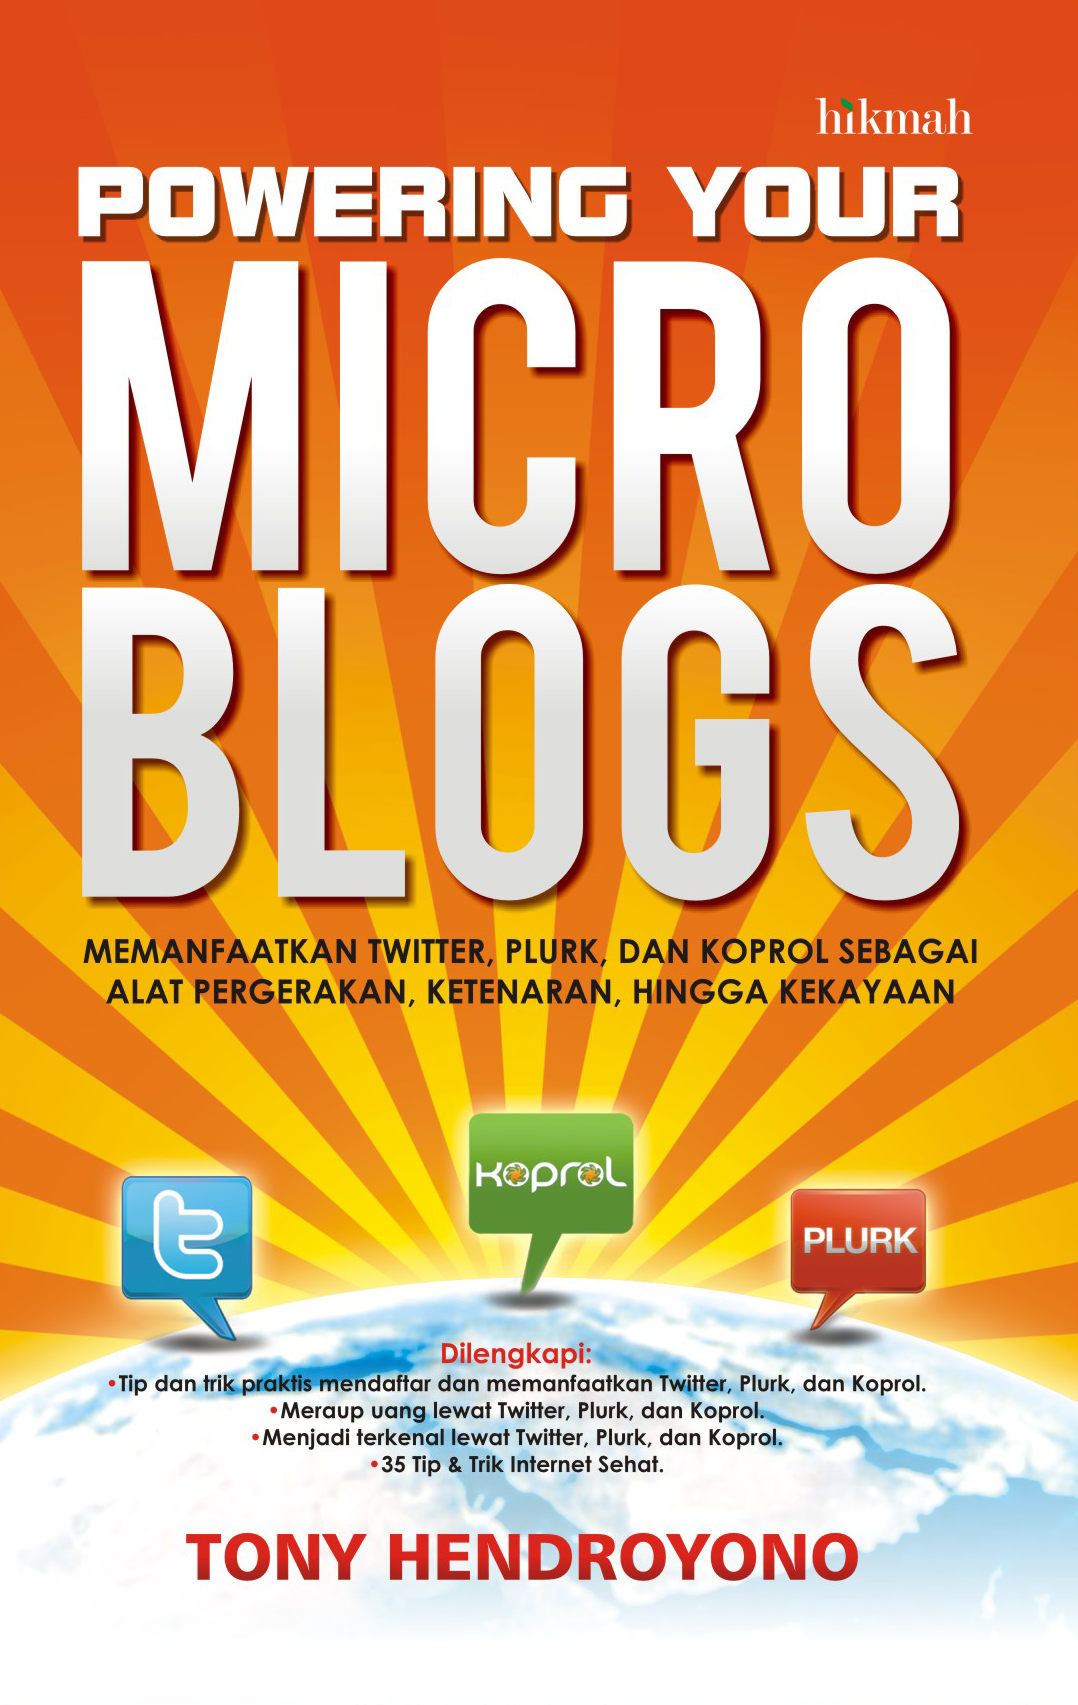 POWERING YOUR MICROBLOGS